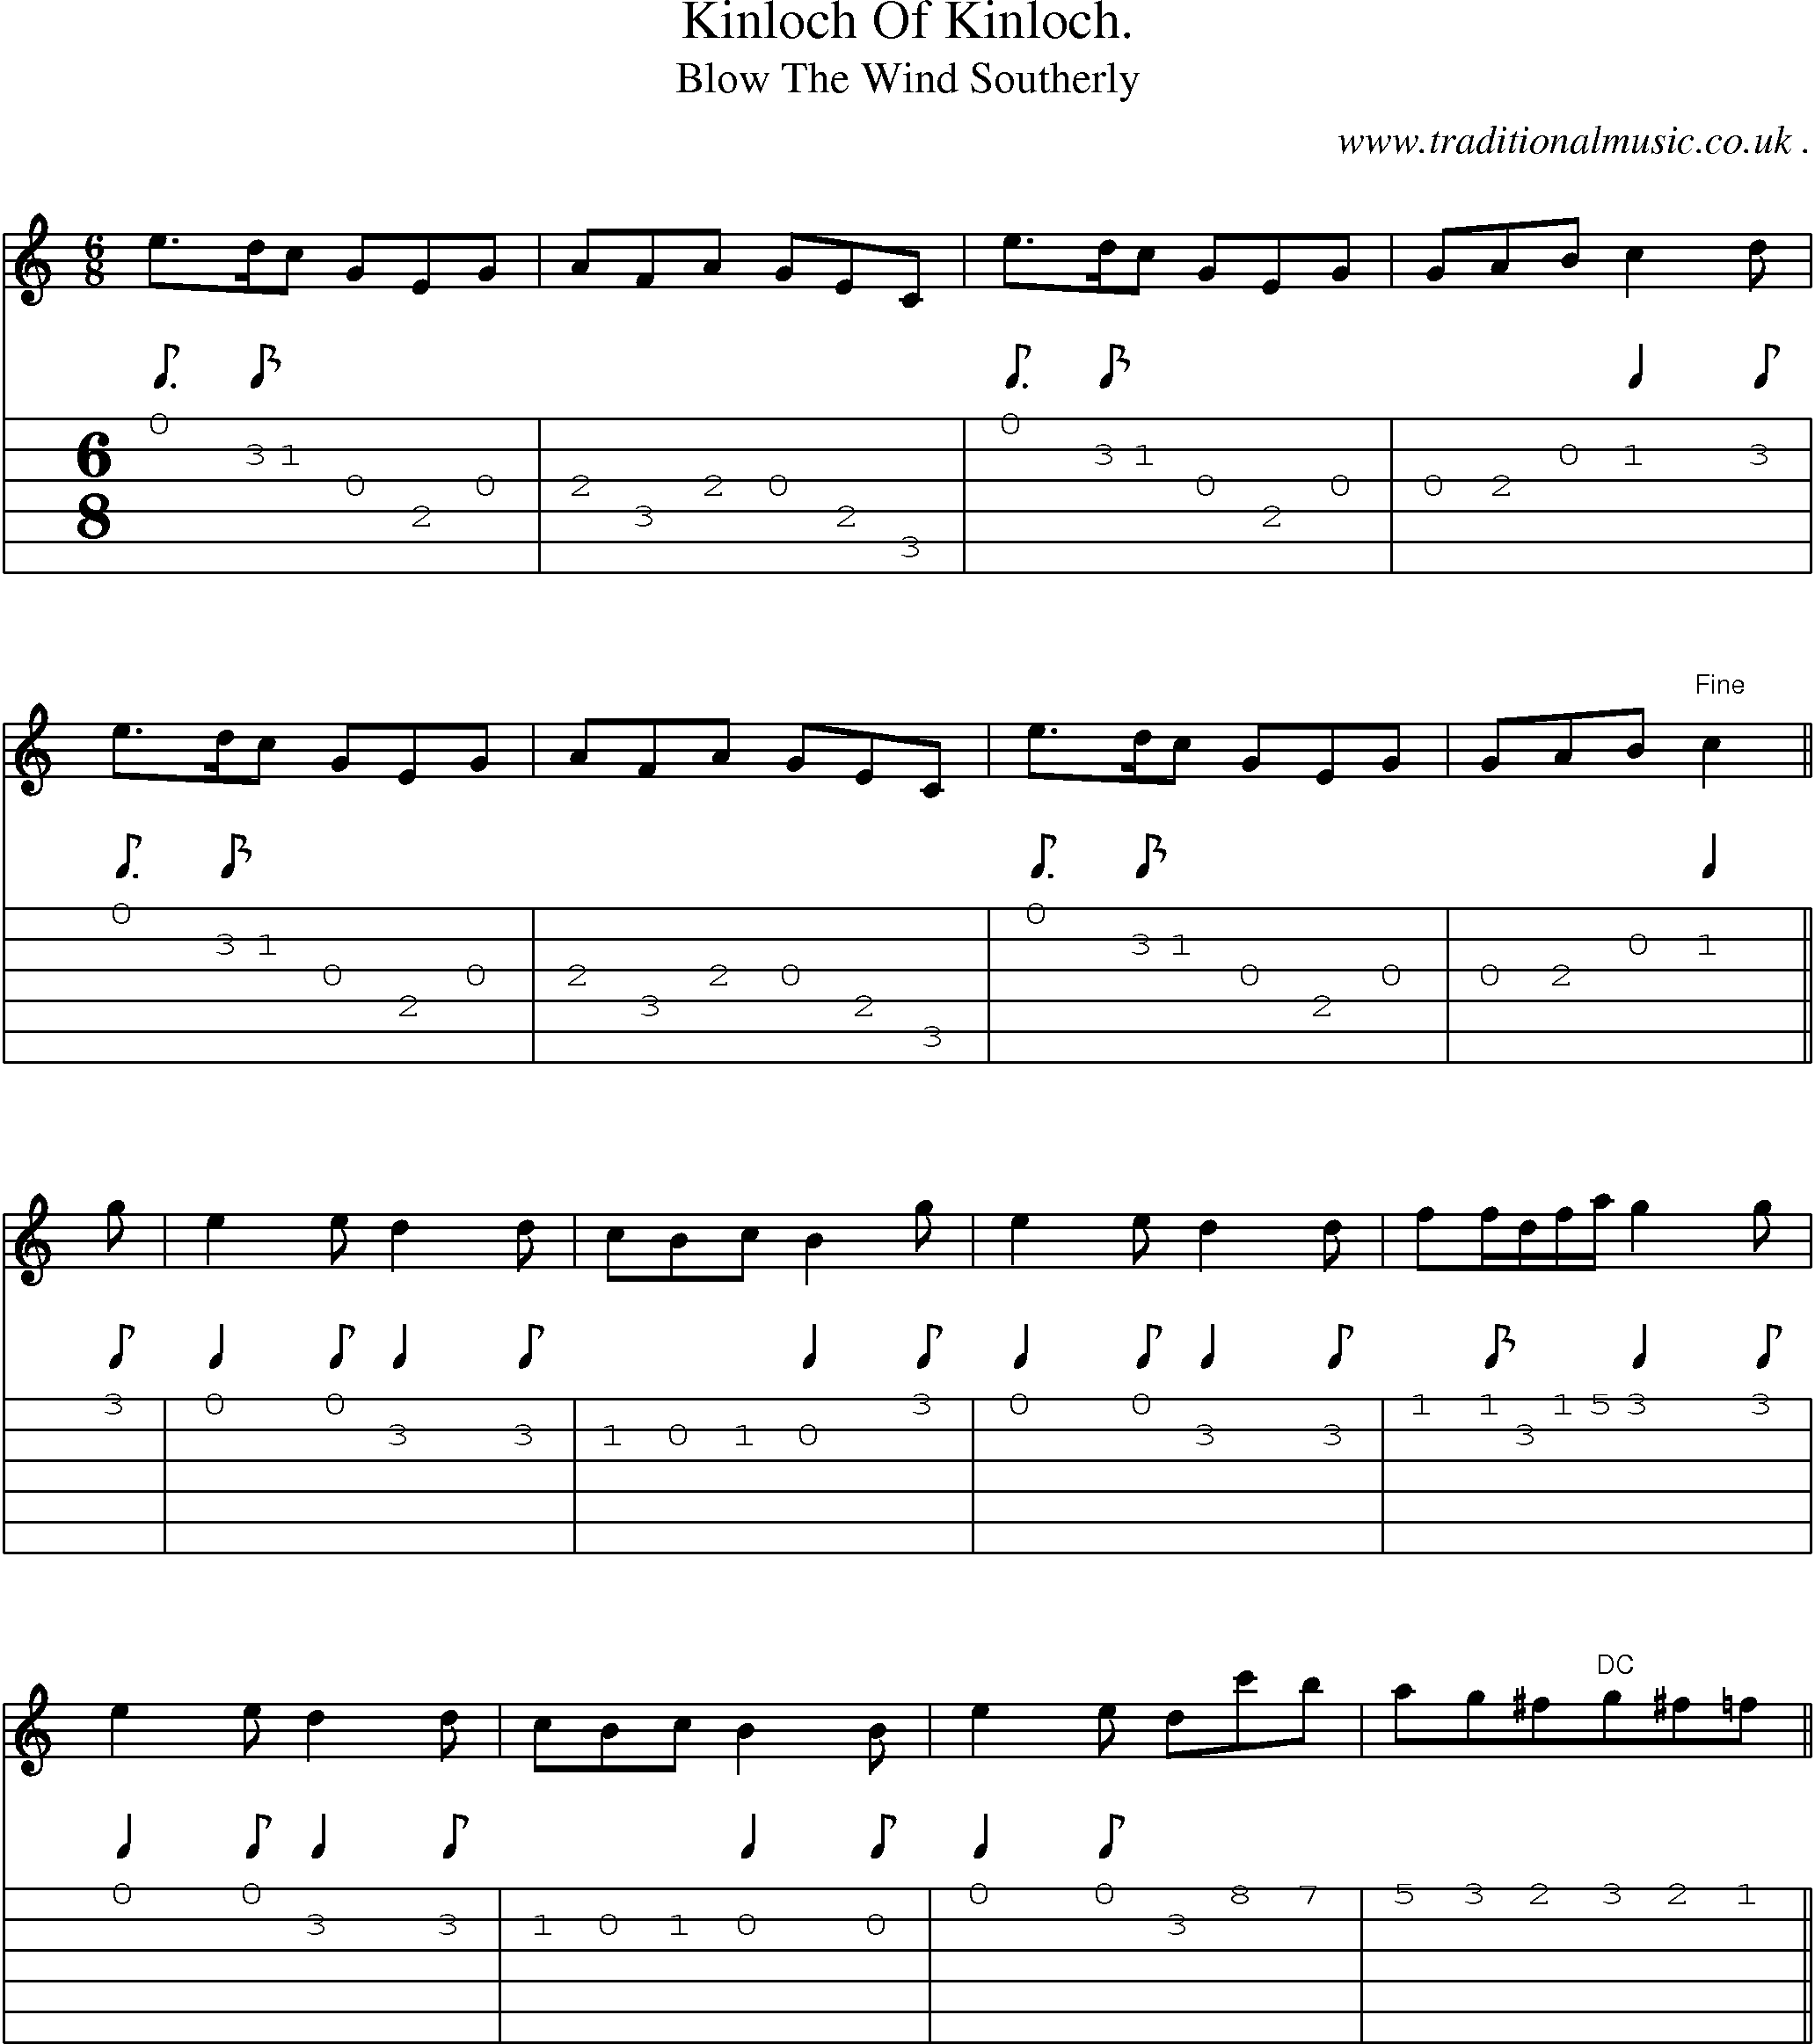 Sheet-Music and Guitar Tabs for Kinloch Of Kinloch